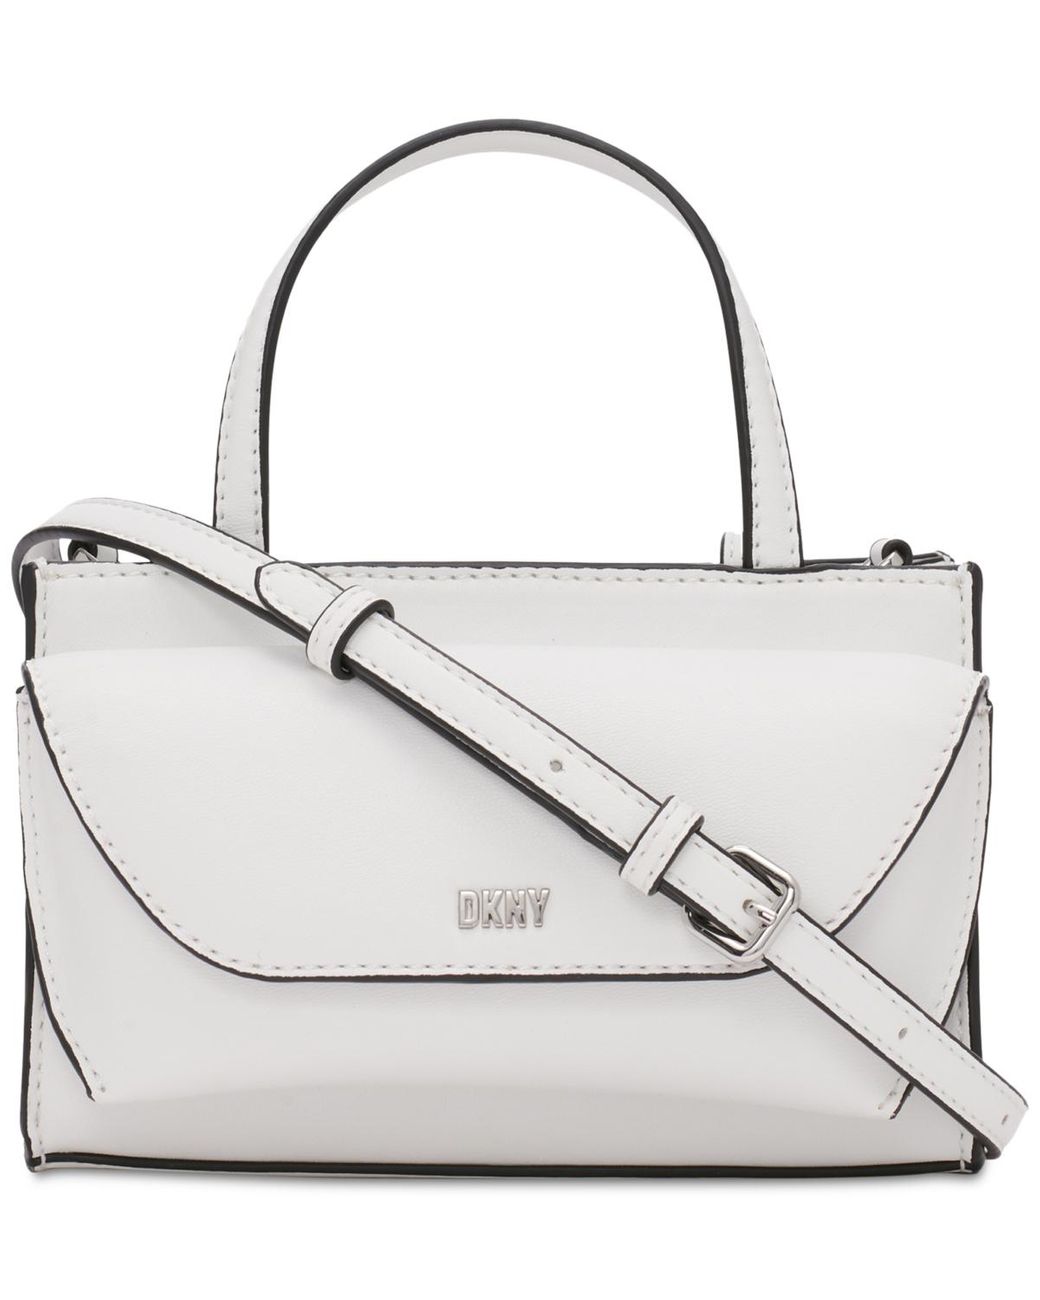 DKNY Quilted Leather Small Flap Crossbody, $158, DKNY